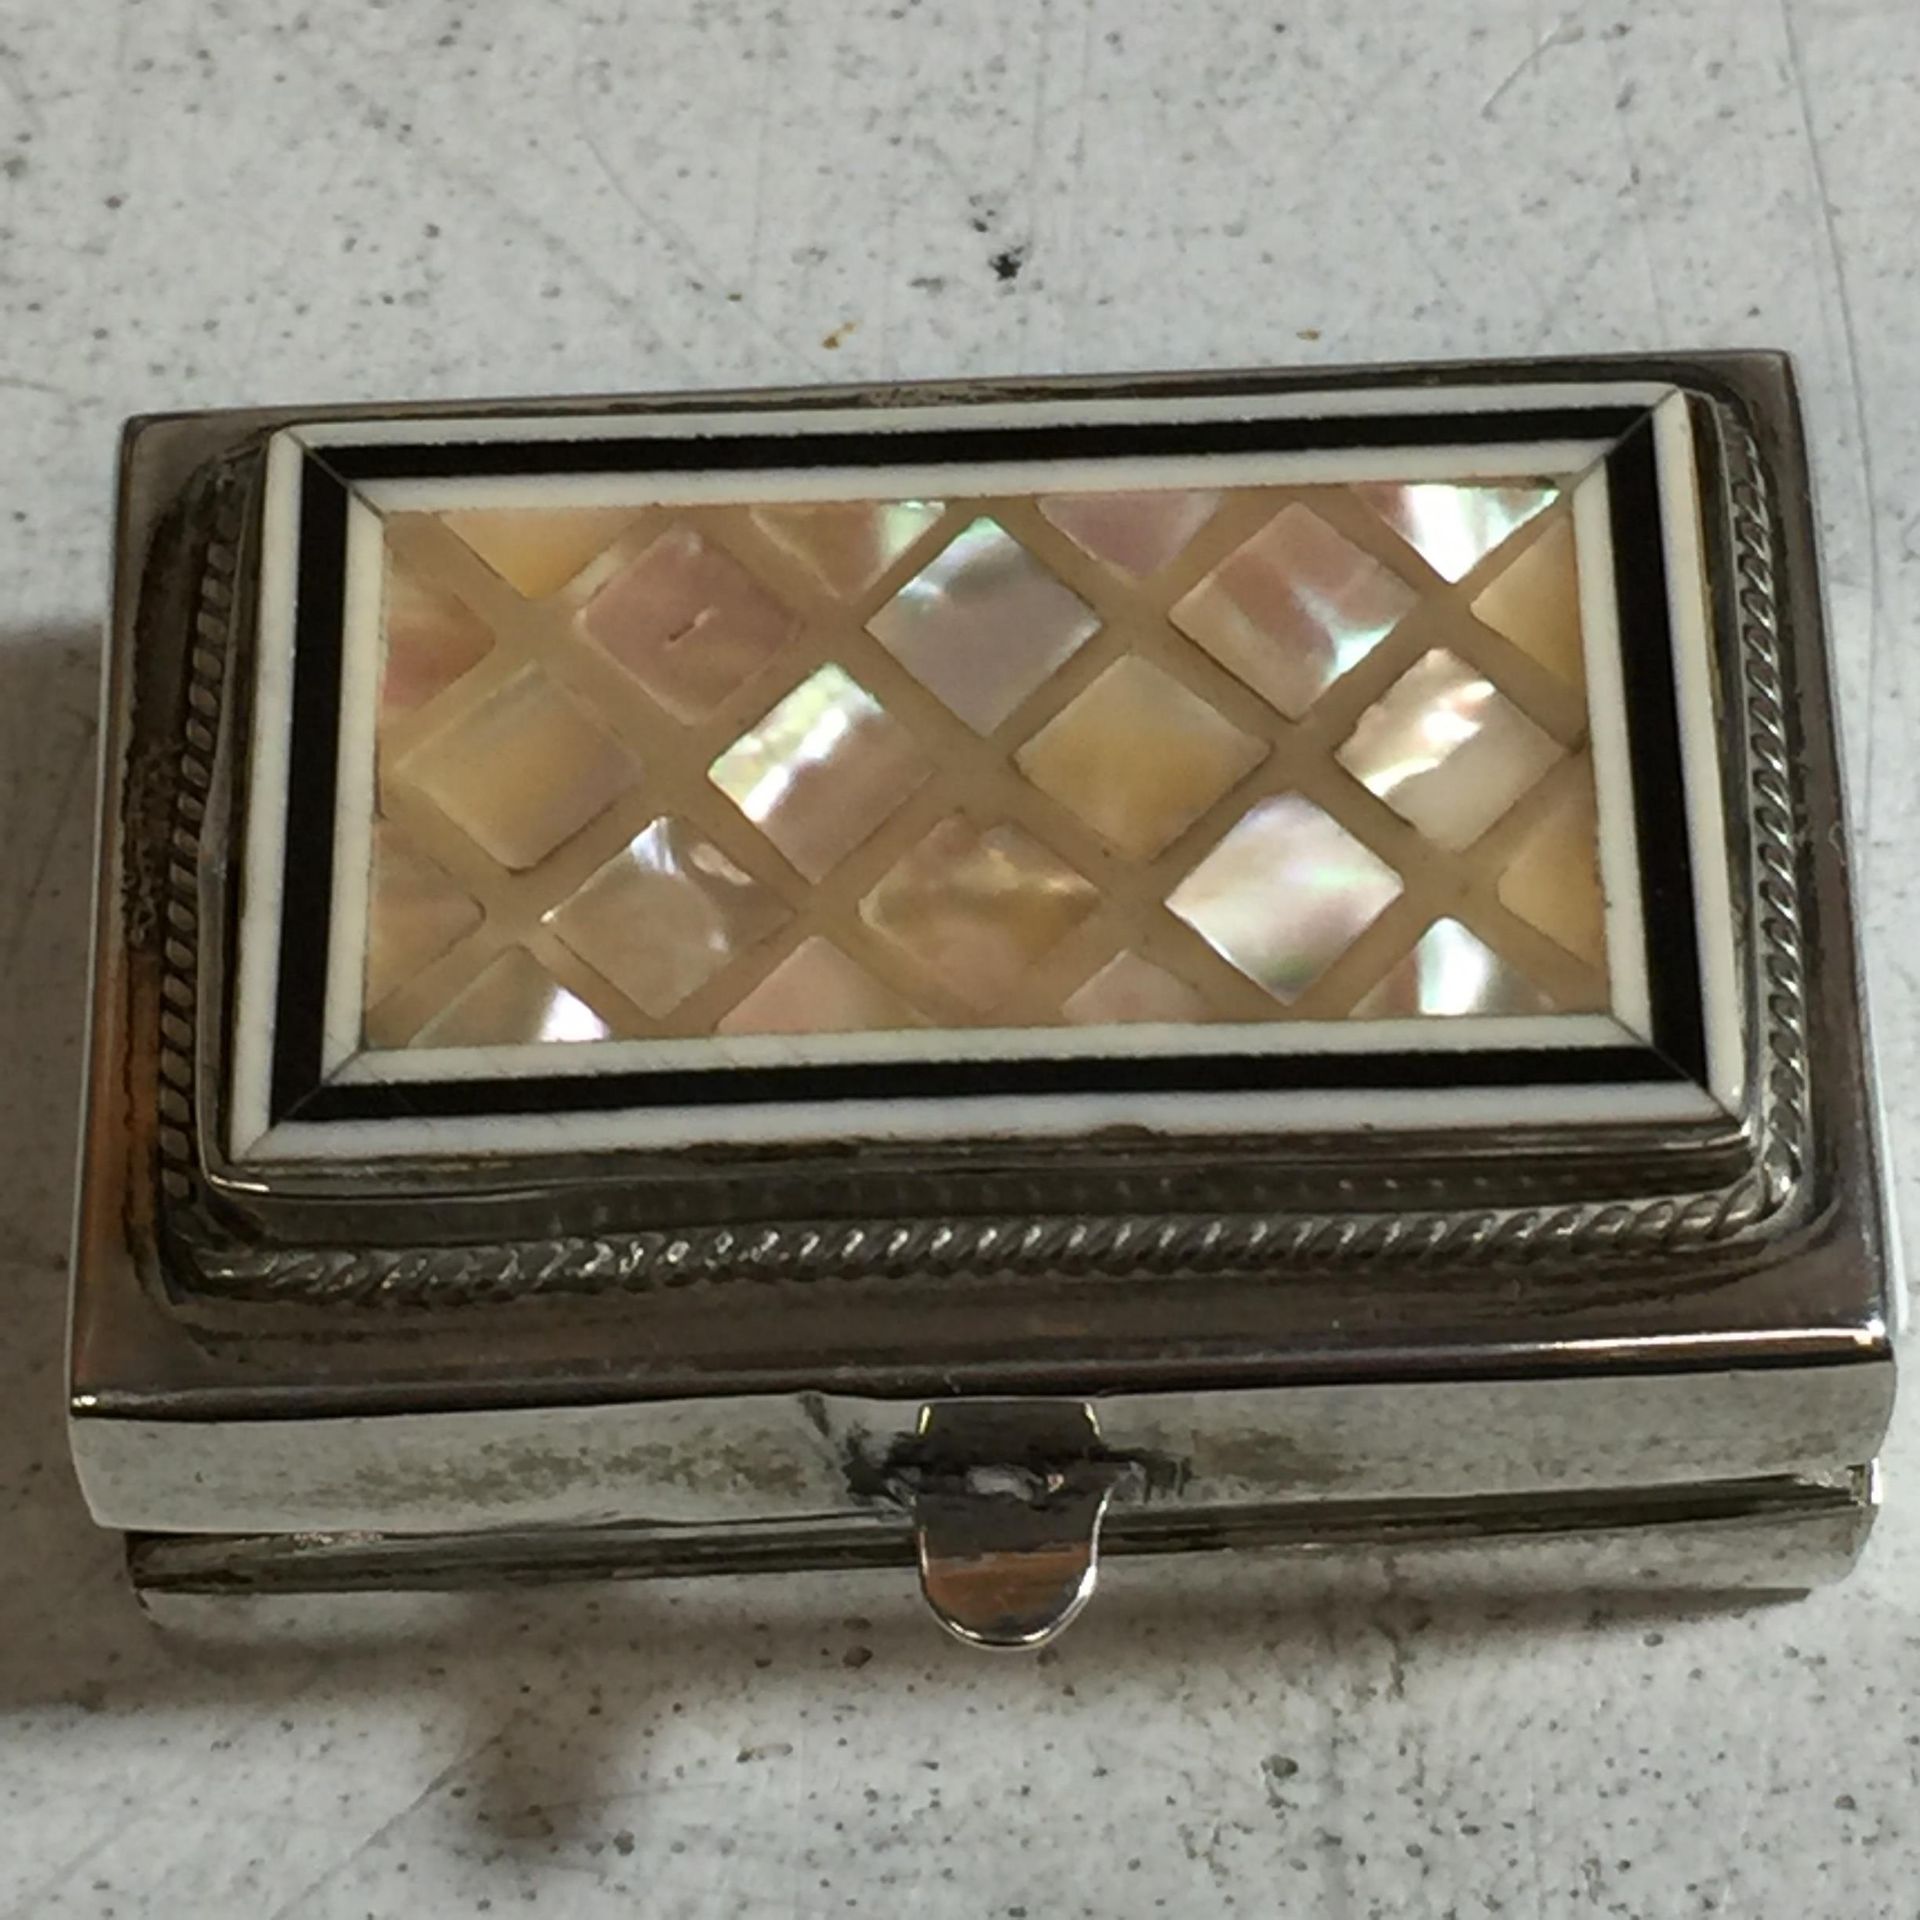 A SILVER TRINKET BOX WITH MOTHER OF PEARL ON THE TOP